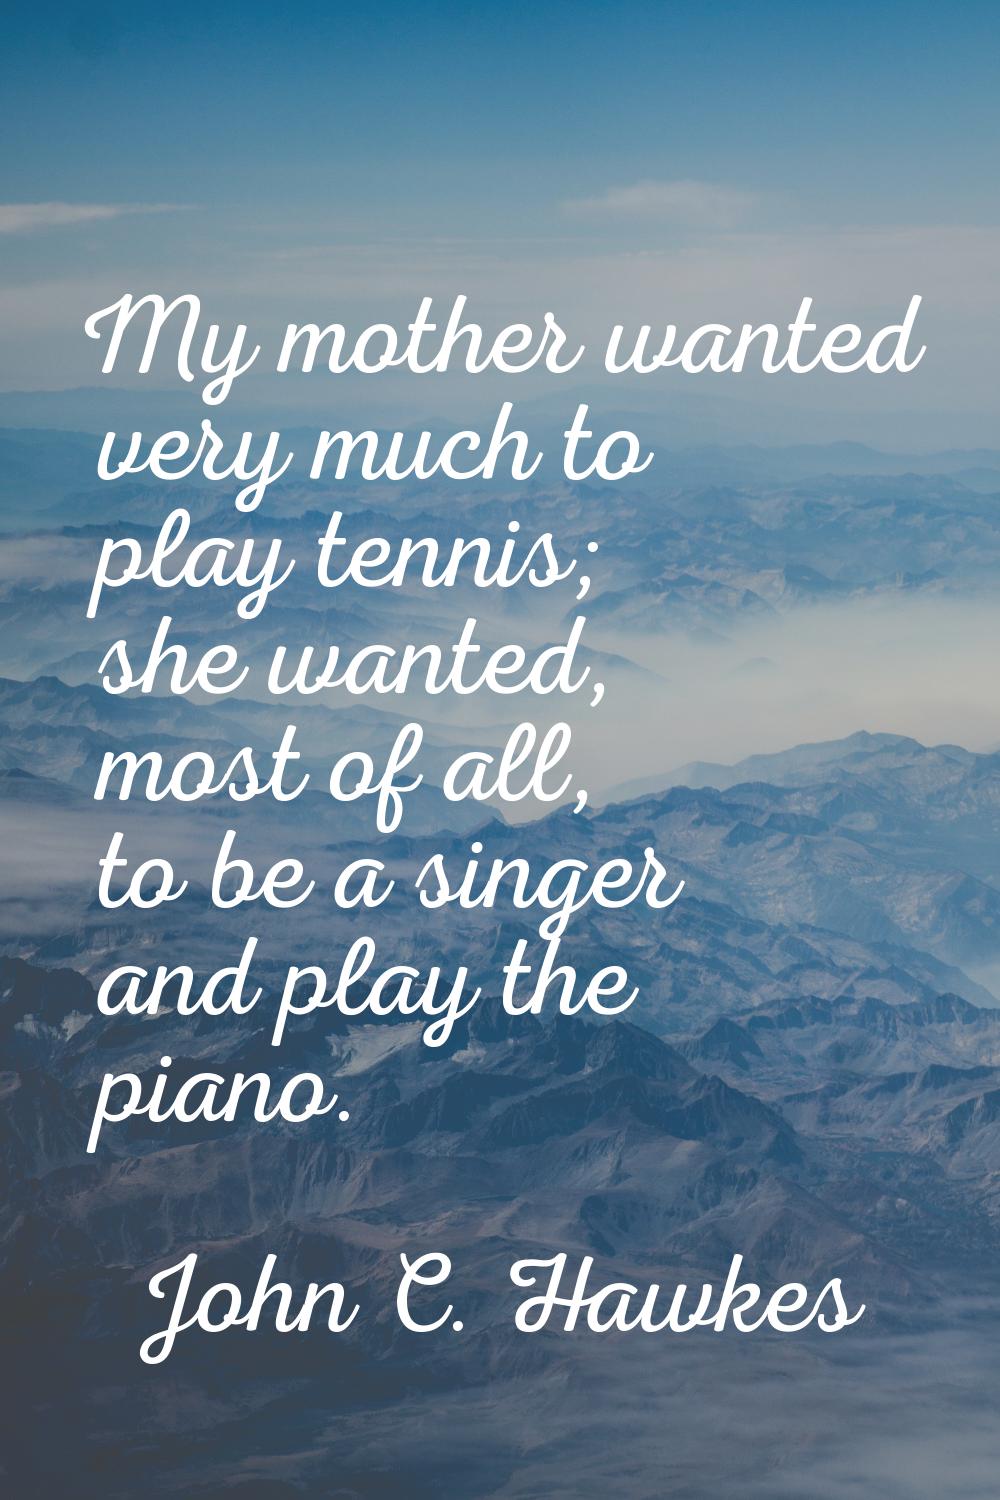 My mother wanted very much to play tennis; she wanted, most of all, to be a singer and play the pia